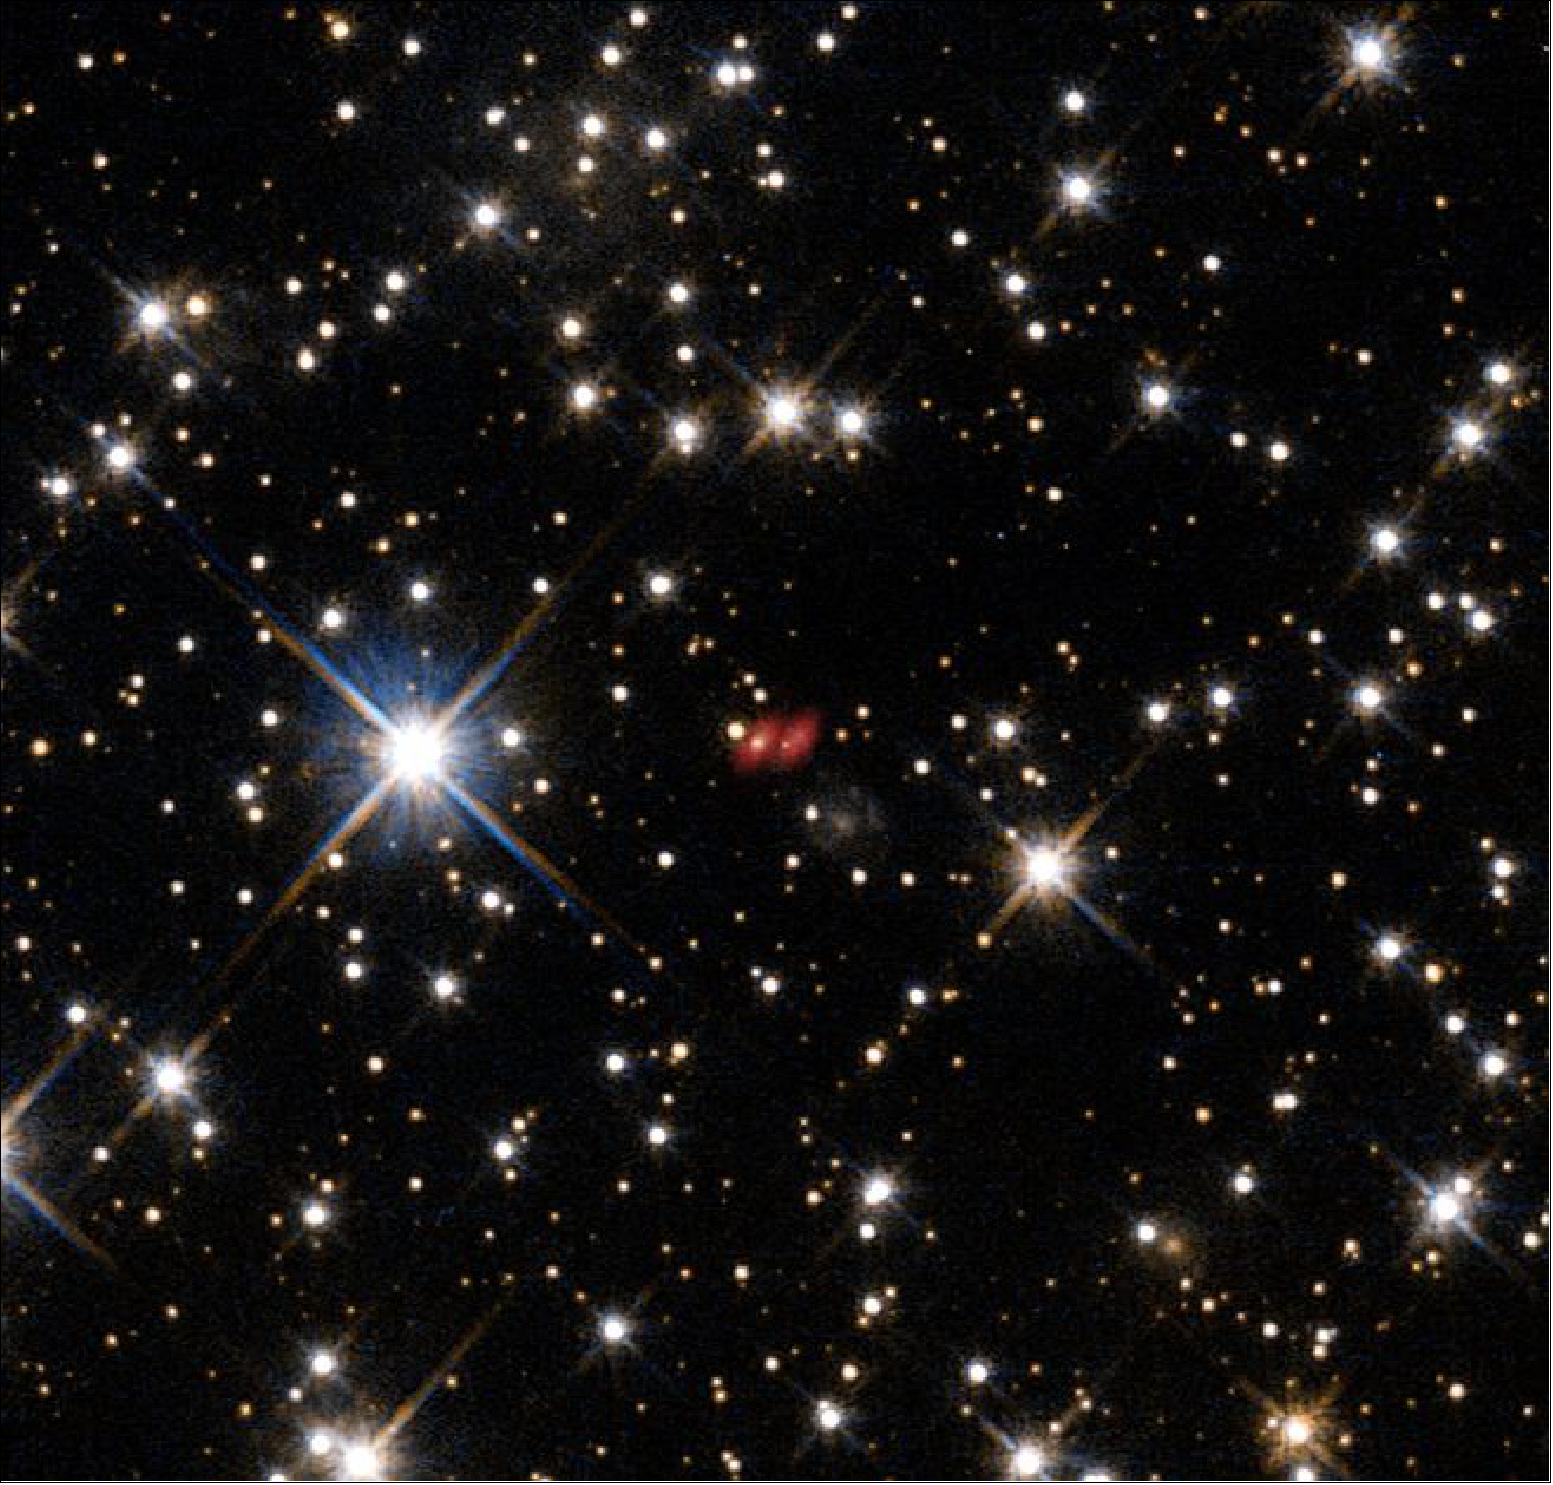 Figure 61: This image from the NASA/ESA Hubble Space Telescope shows the distant active galaxy PKG 1830-211. It shows up as an unremarkable looking star-like object, hard to spot among the many much closer real stars in this picture. Recent ALMA observations show both components of this distant gravitational lens and are marked in red on this composite picture (image credit: ALMA (ESO/NAOJ/NRAO), NASA/ESA, I. Martí-Vidal) 76)